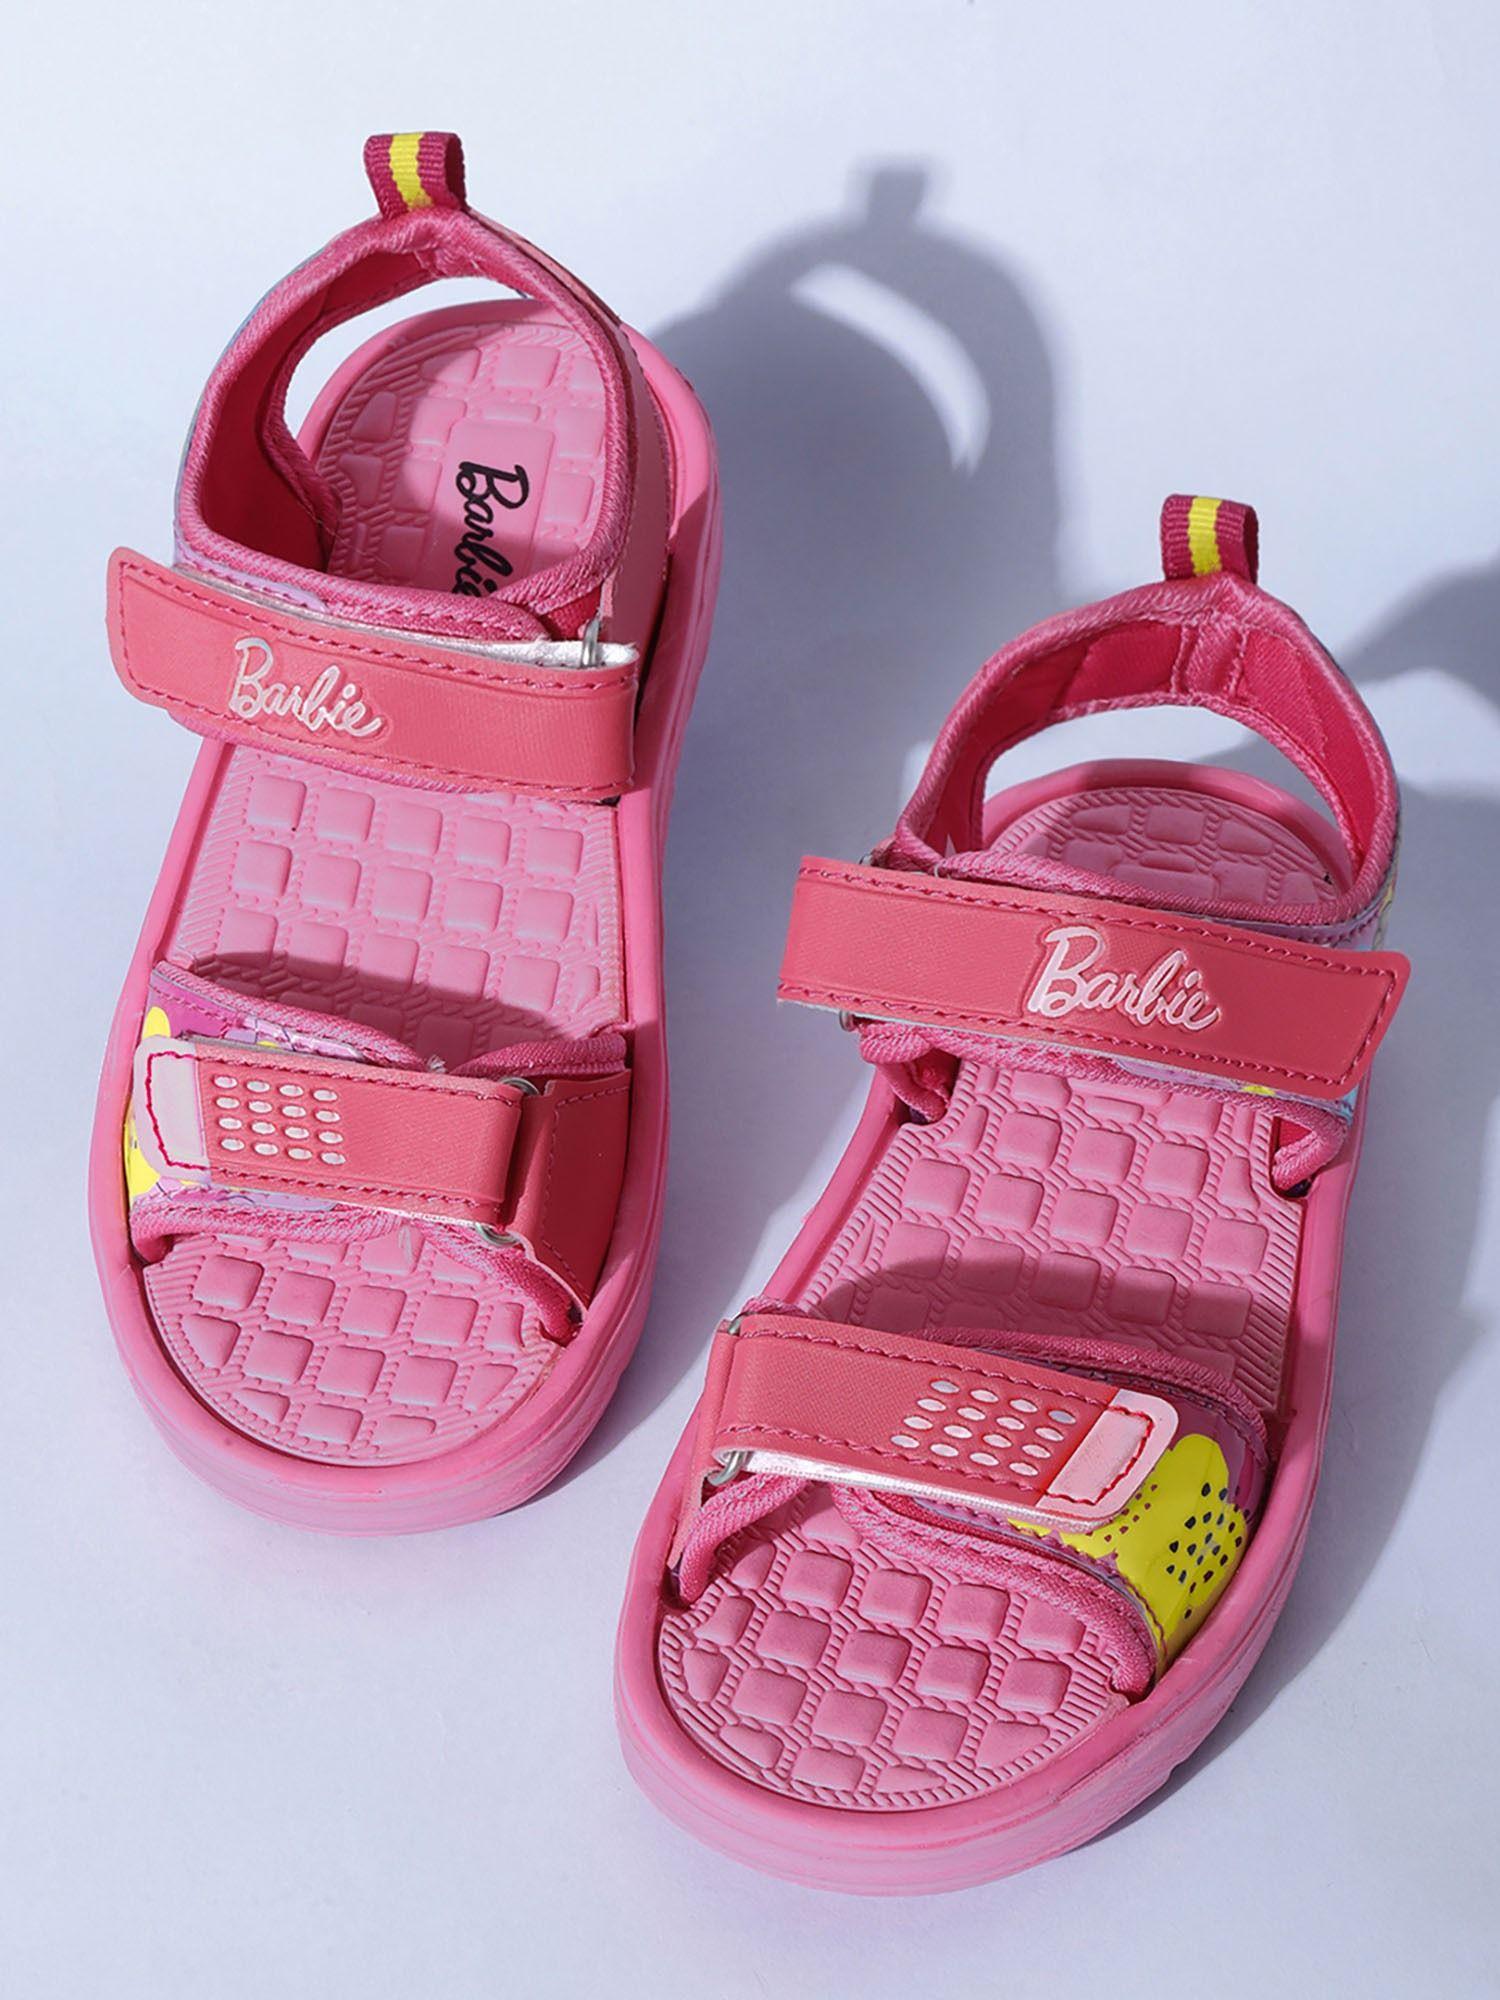 barbie pink printed sandals for girls